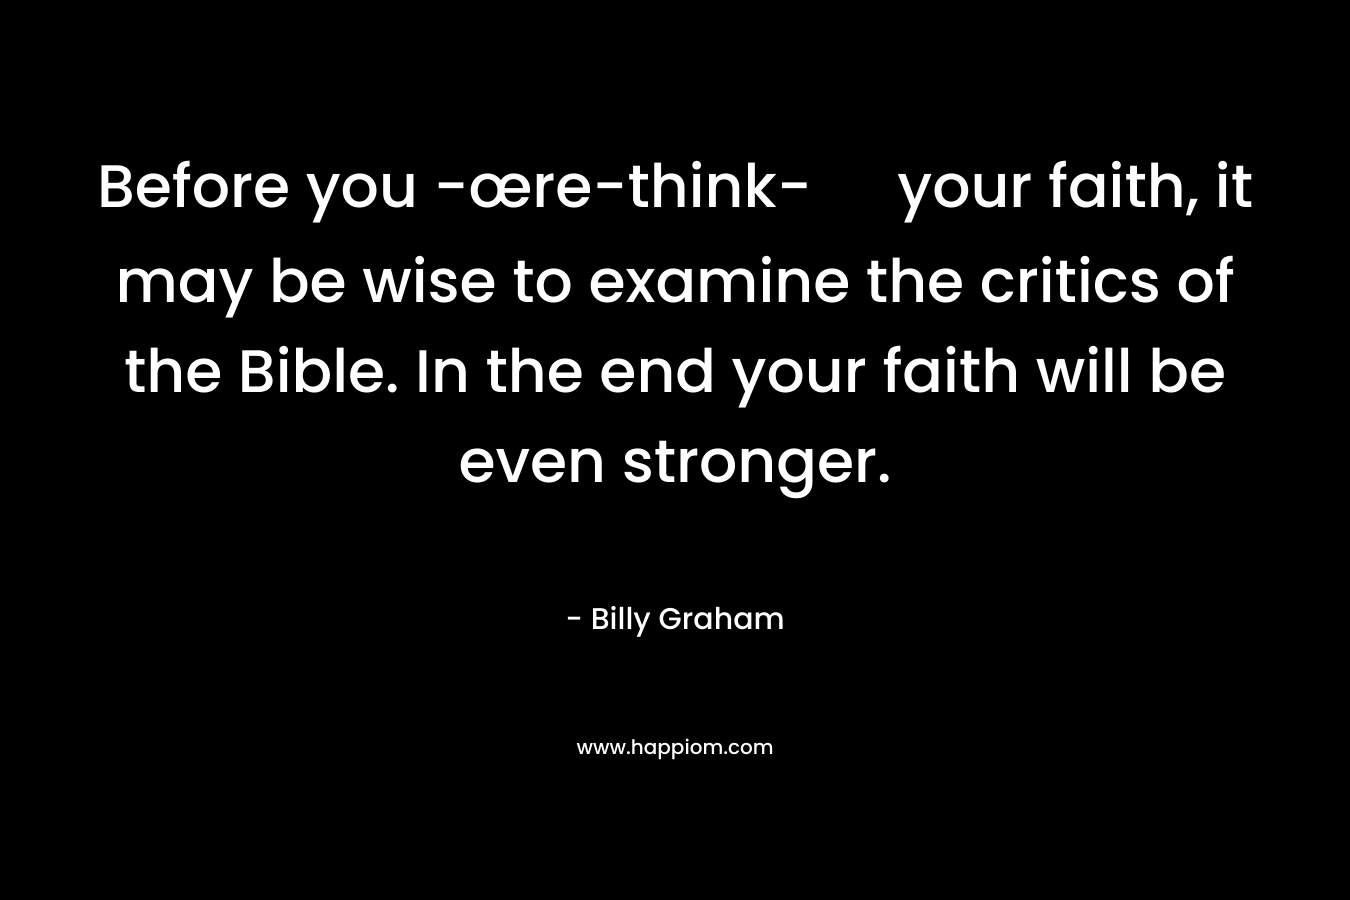 Before you -œre-think- your faith, it may be wise to examine the critics of the Bible. In the end your faith will be even stronger. – Billy Graham